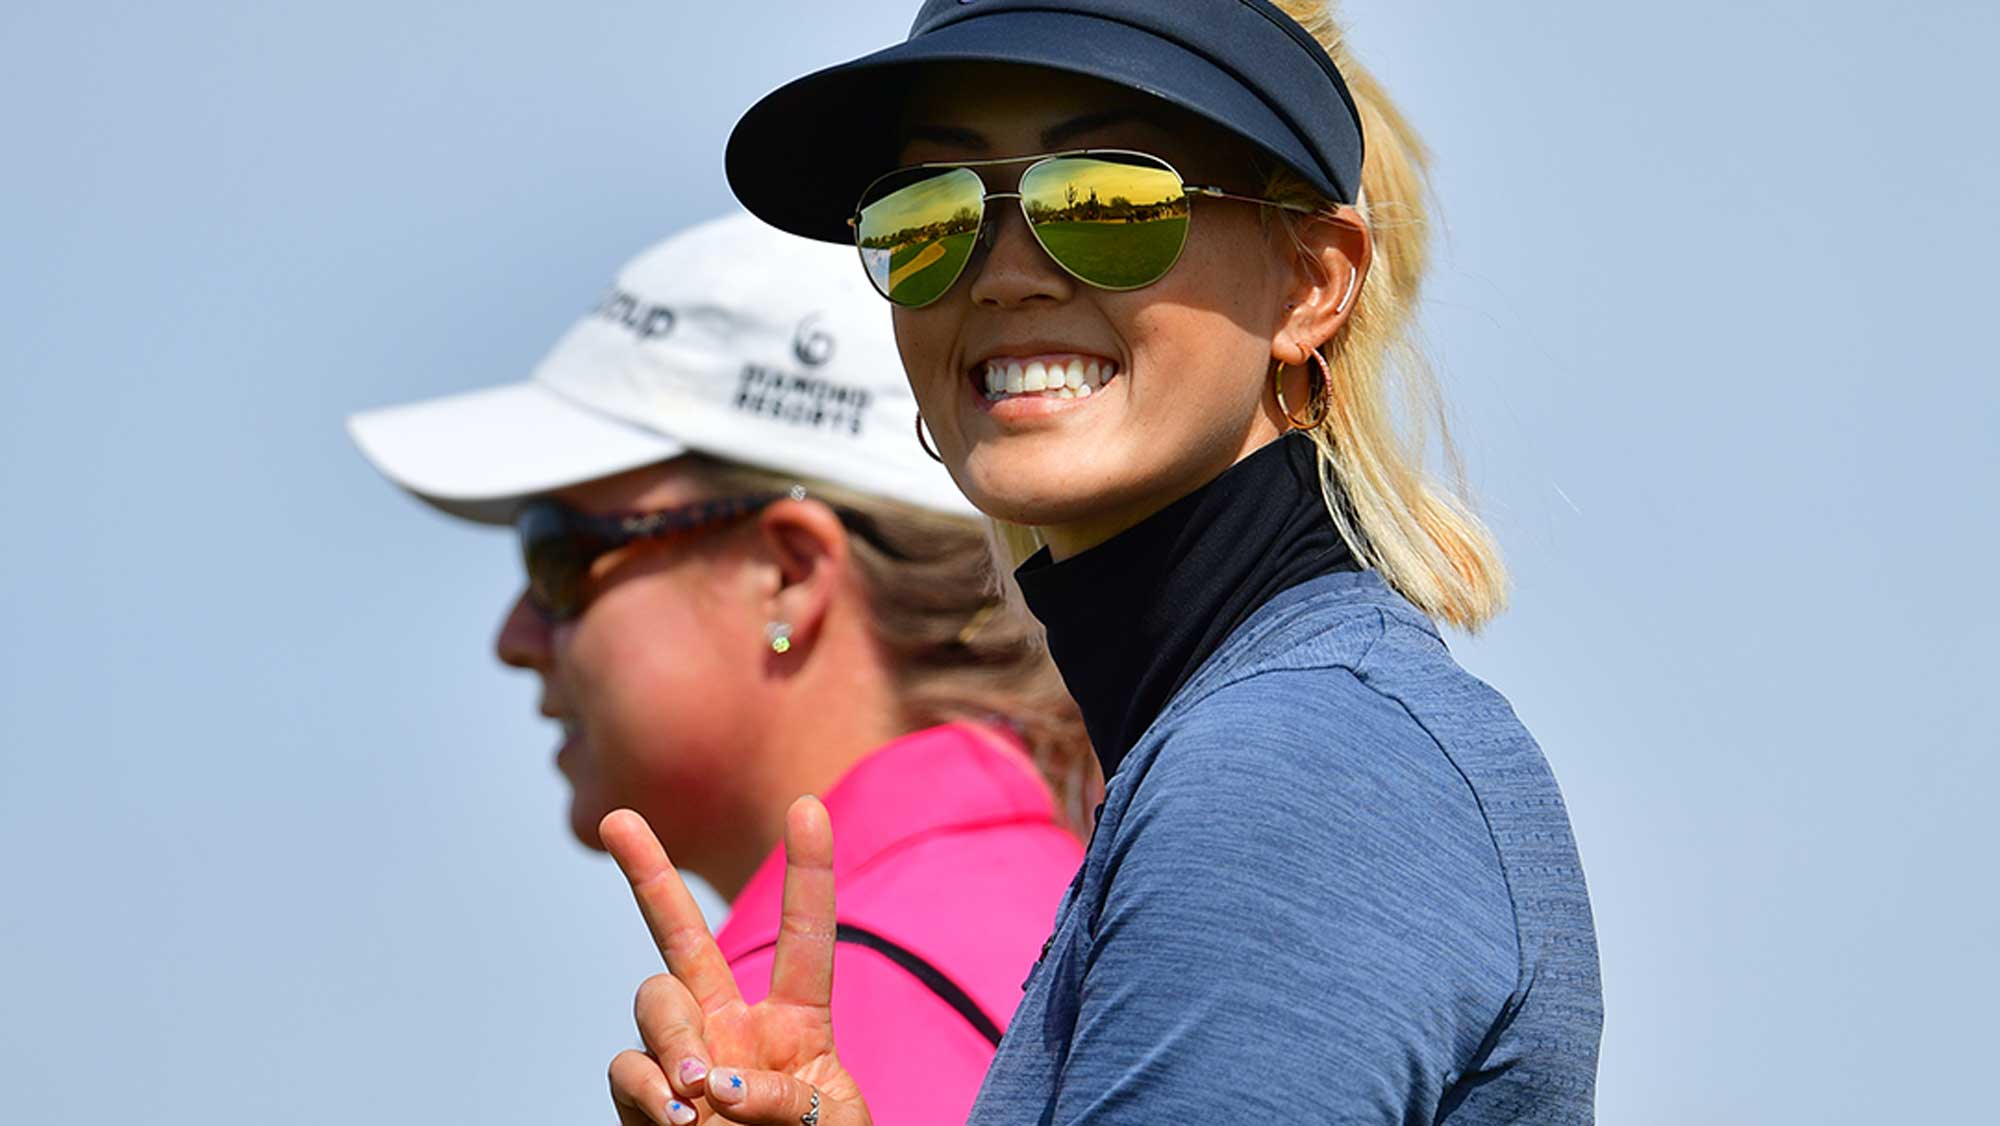 Michelle Wie Gives the Peace Sign to the Camera